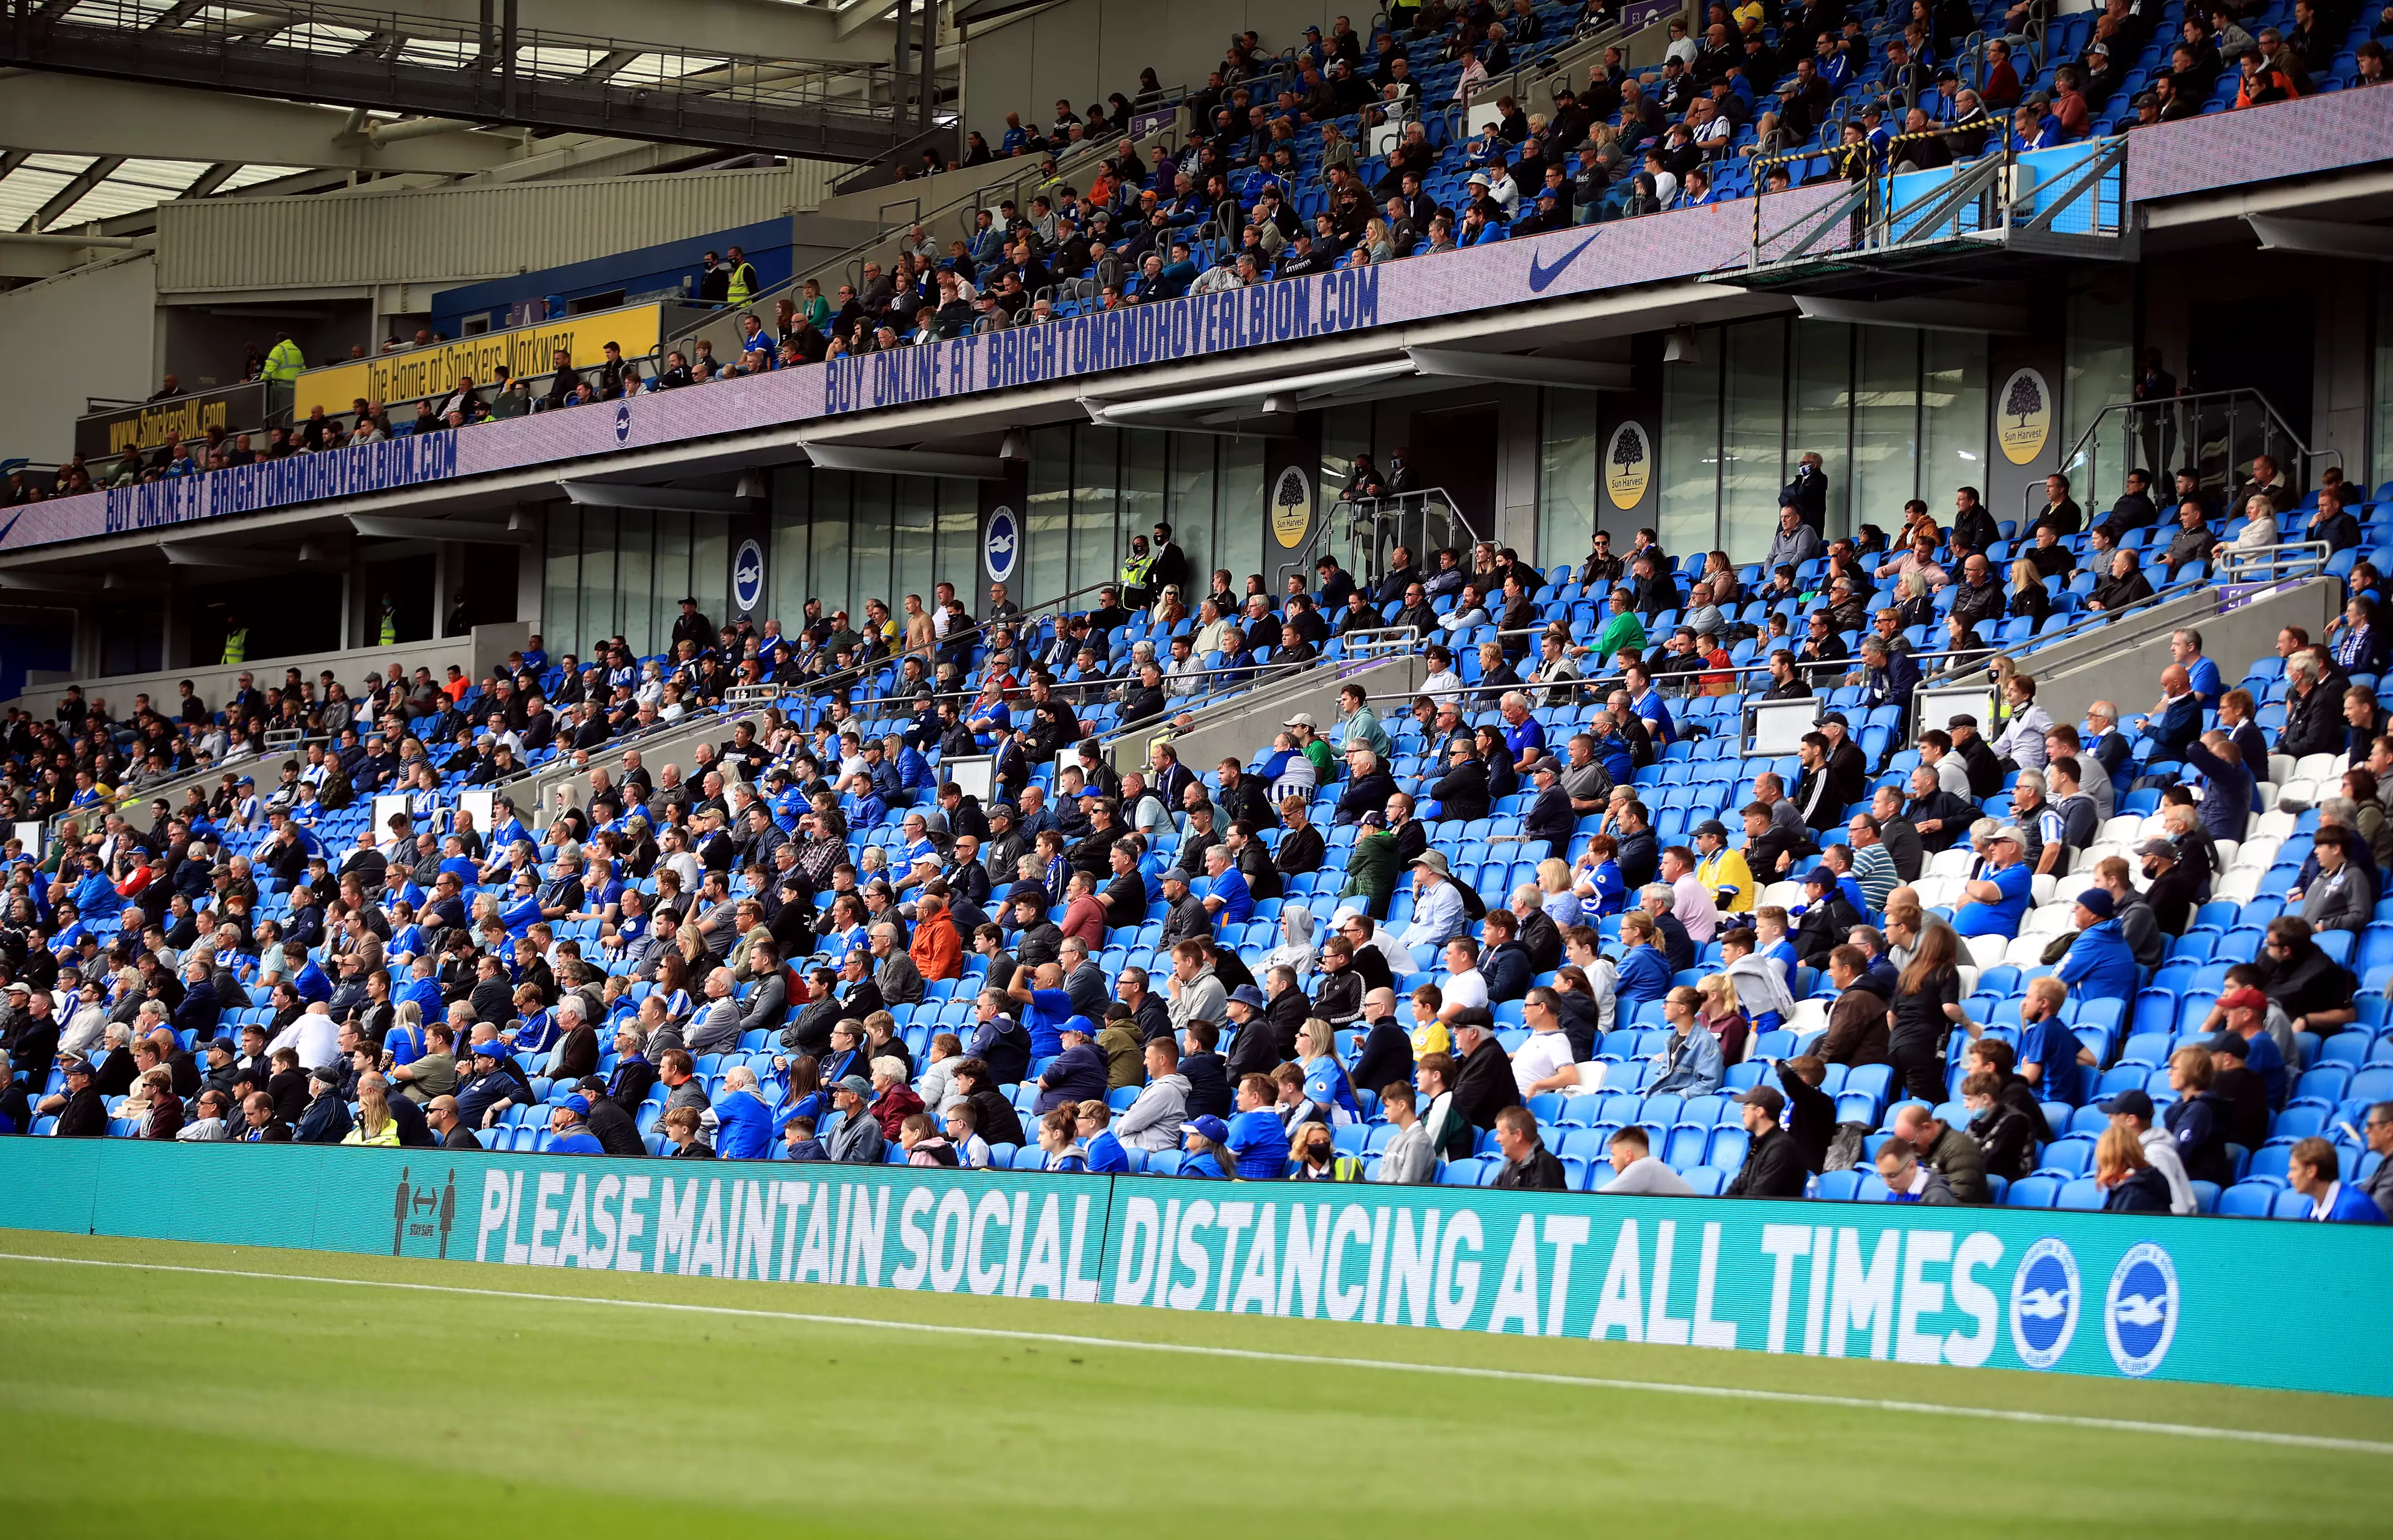 Chelsea and Brighton had fans at their friendly in August. Image: PA Images